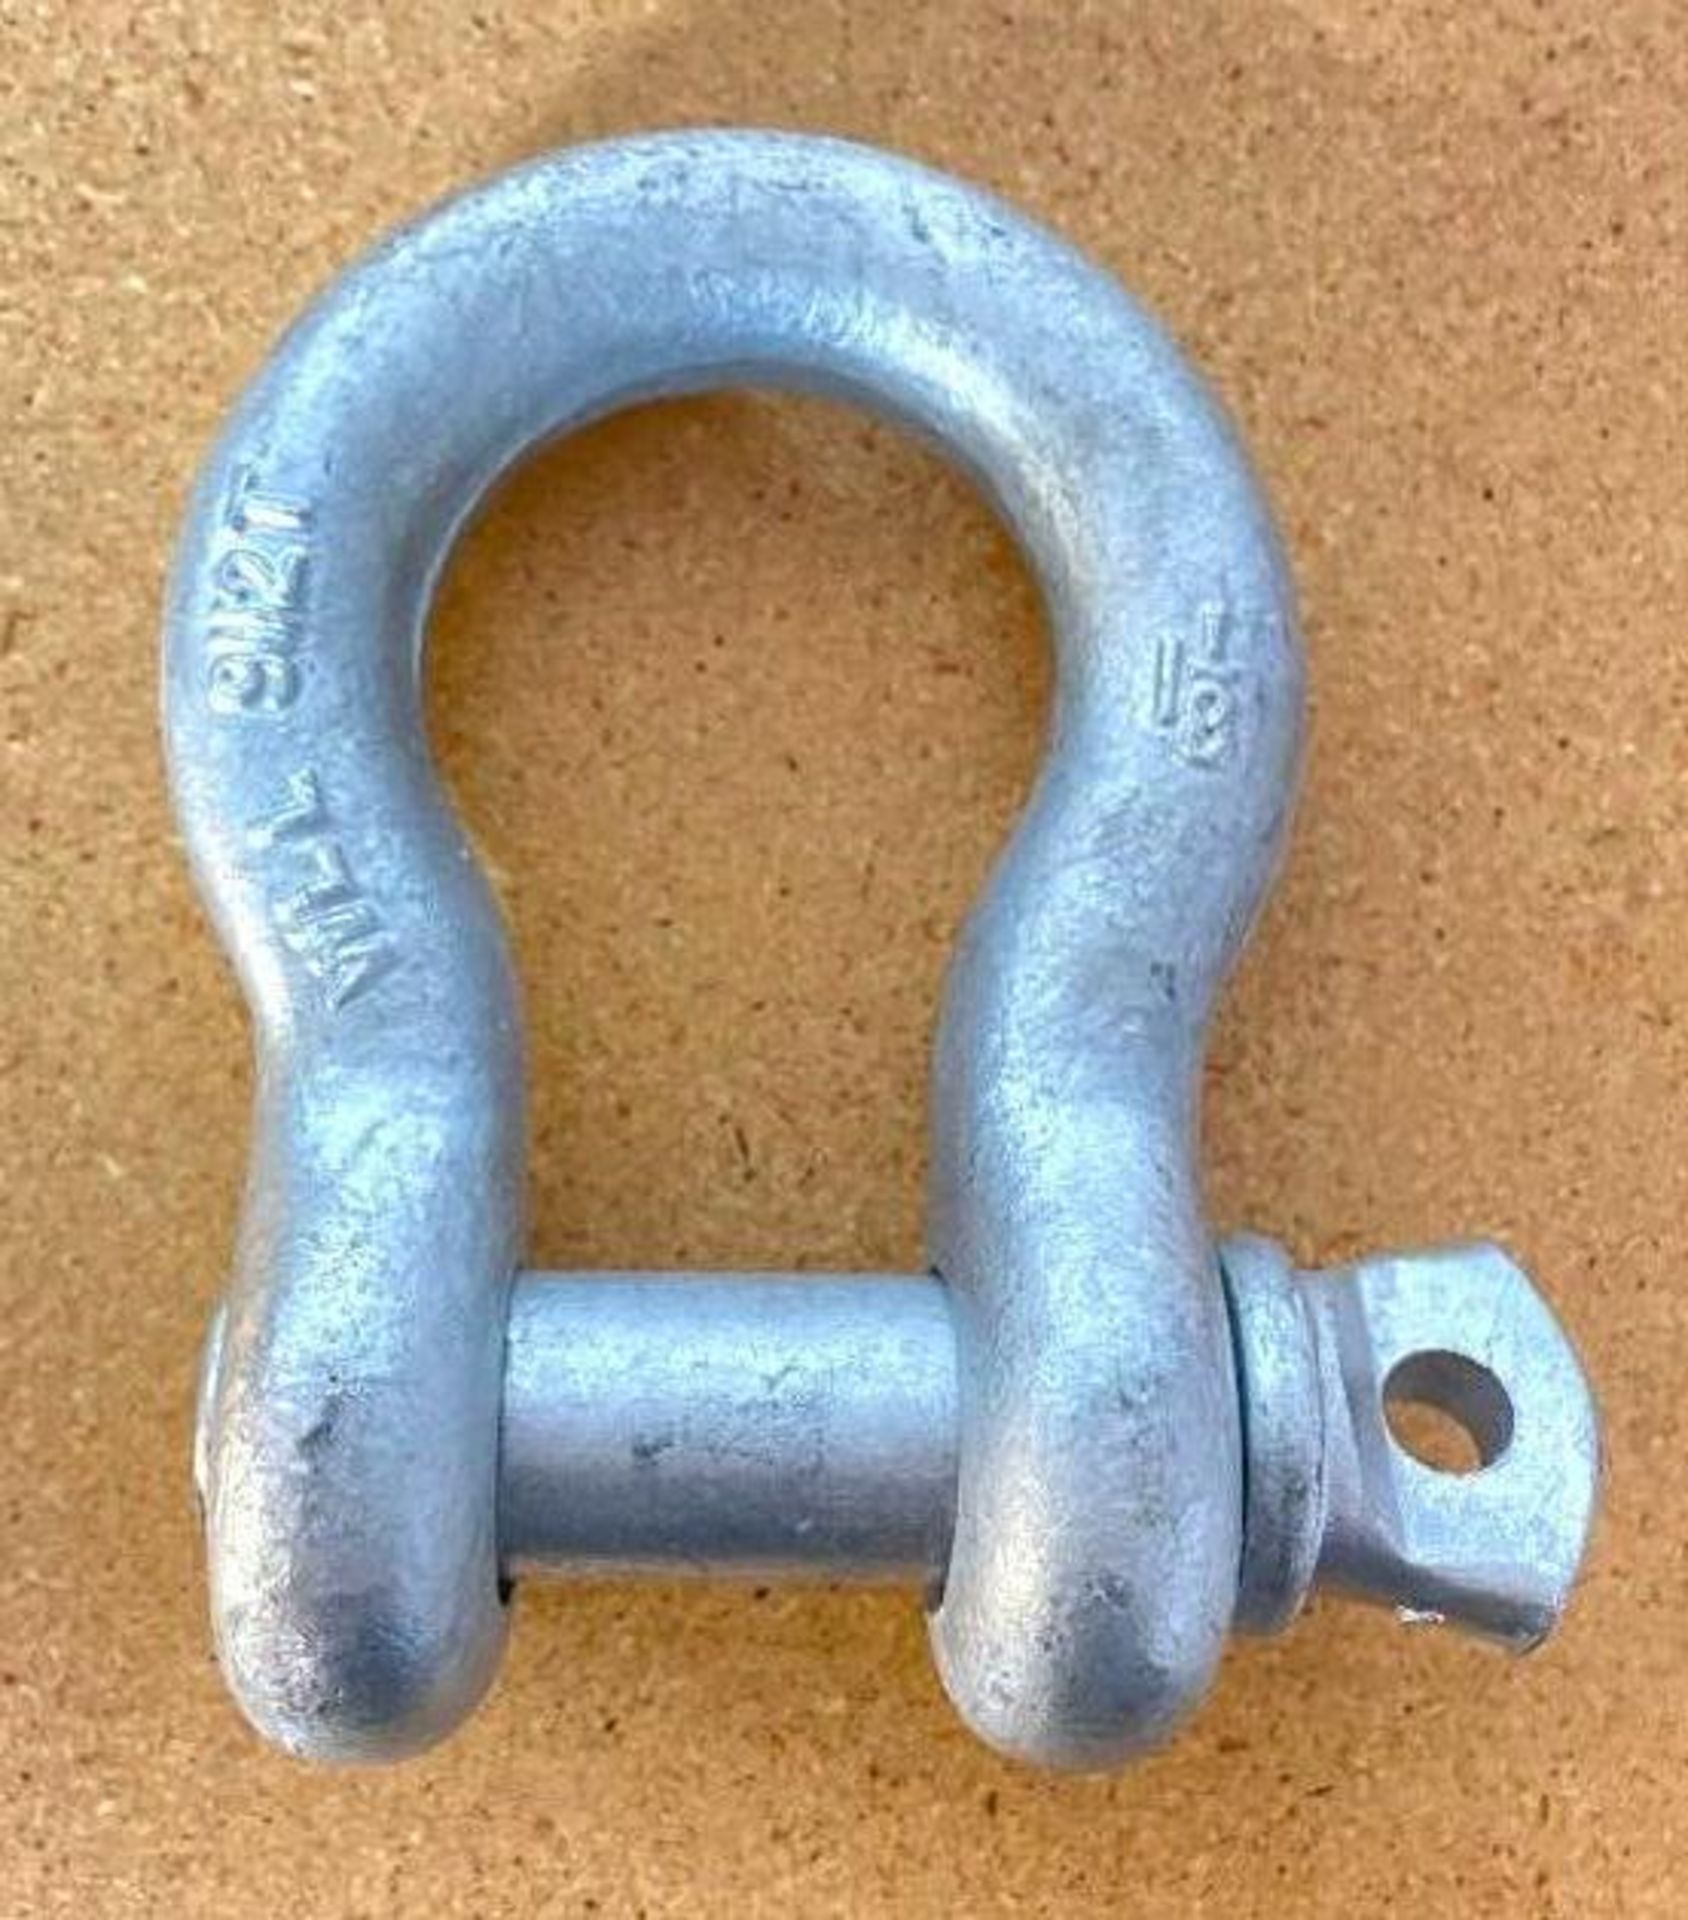 DESCRIPTION: (4) 1-1/8" SCREW PIN ANCHOR SHACKLE HDG (5-PACK) BRAND/MODEL: LACLEDE CHAIN CO SIZE: 1- - Image 2 of 8